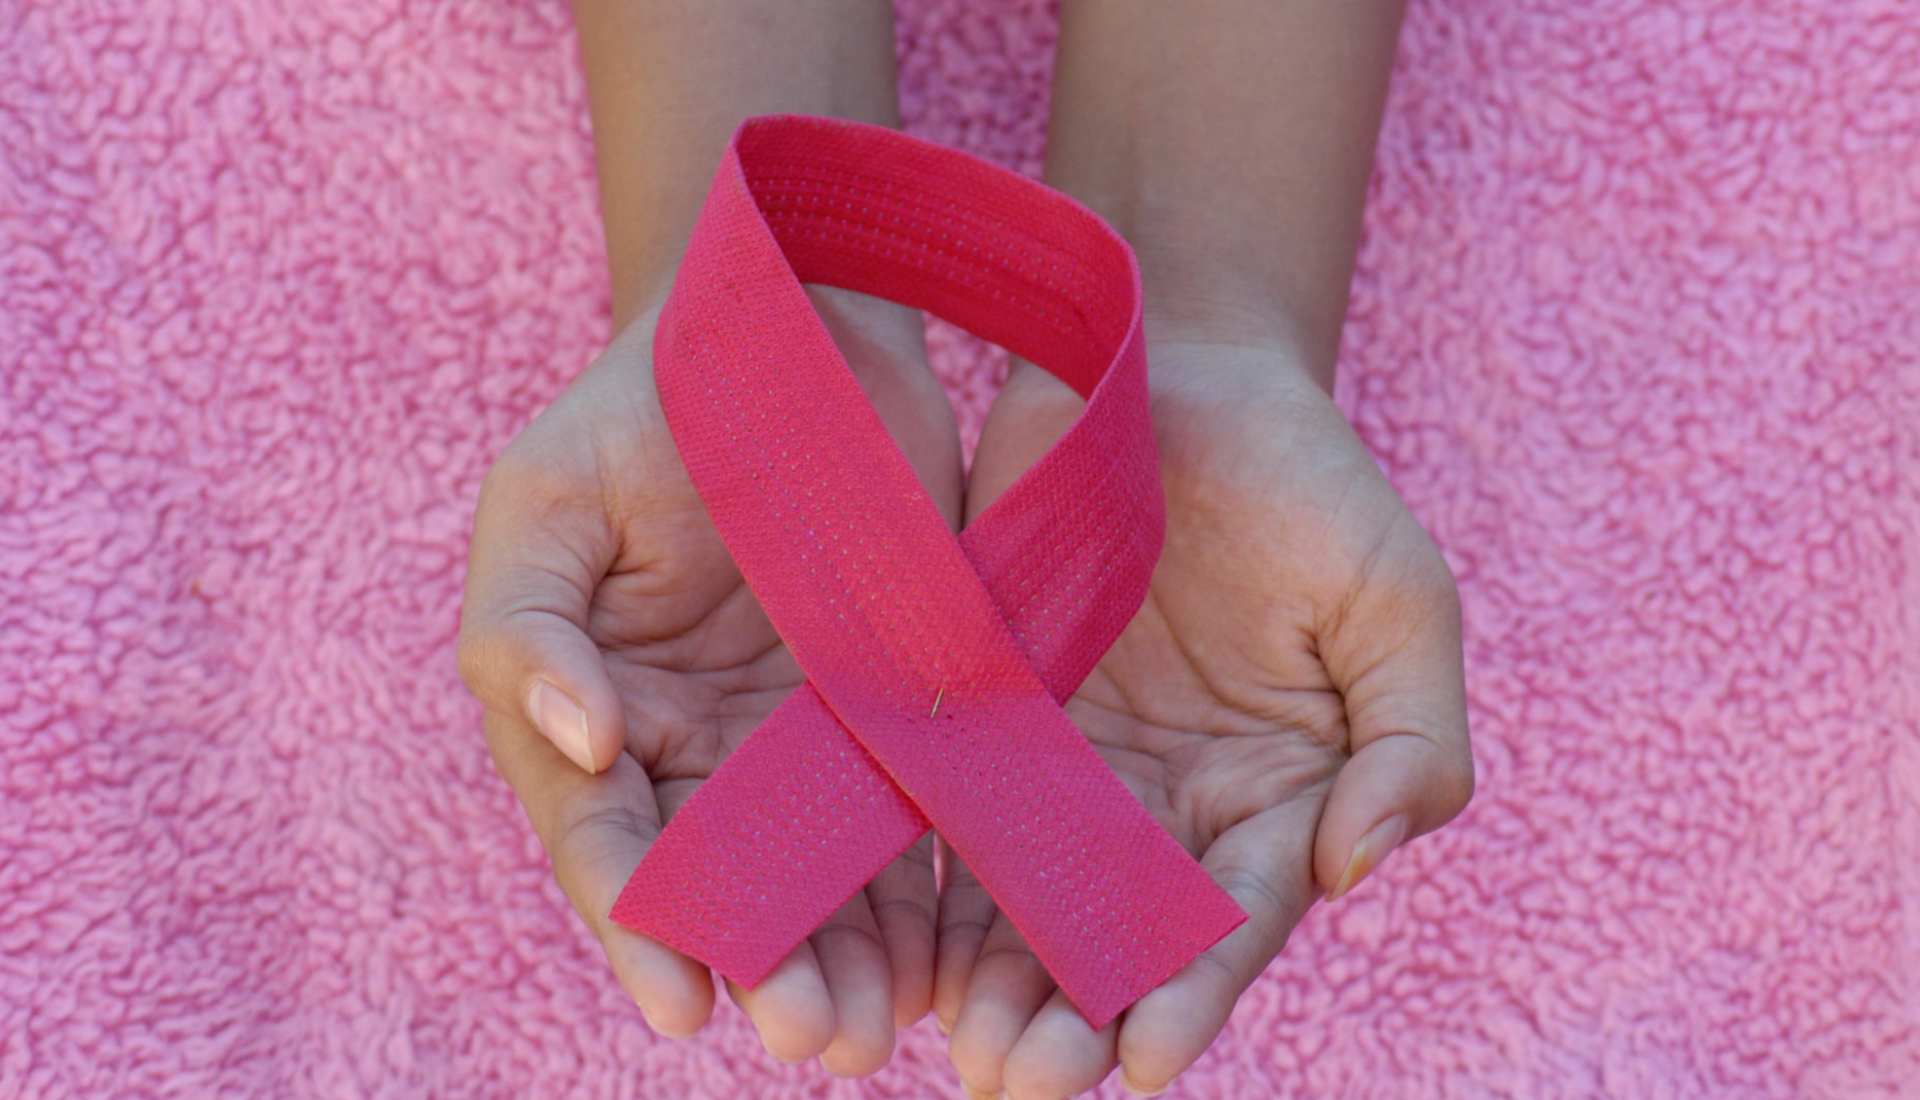 Study evaluated the evolution of the quality of life of breast cancer patients